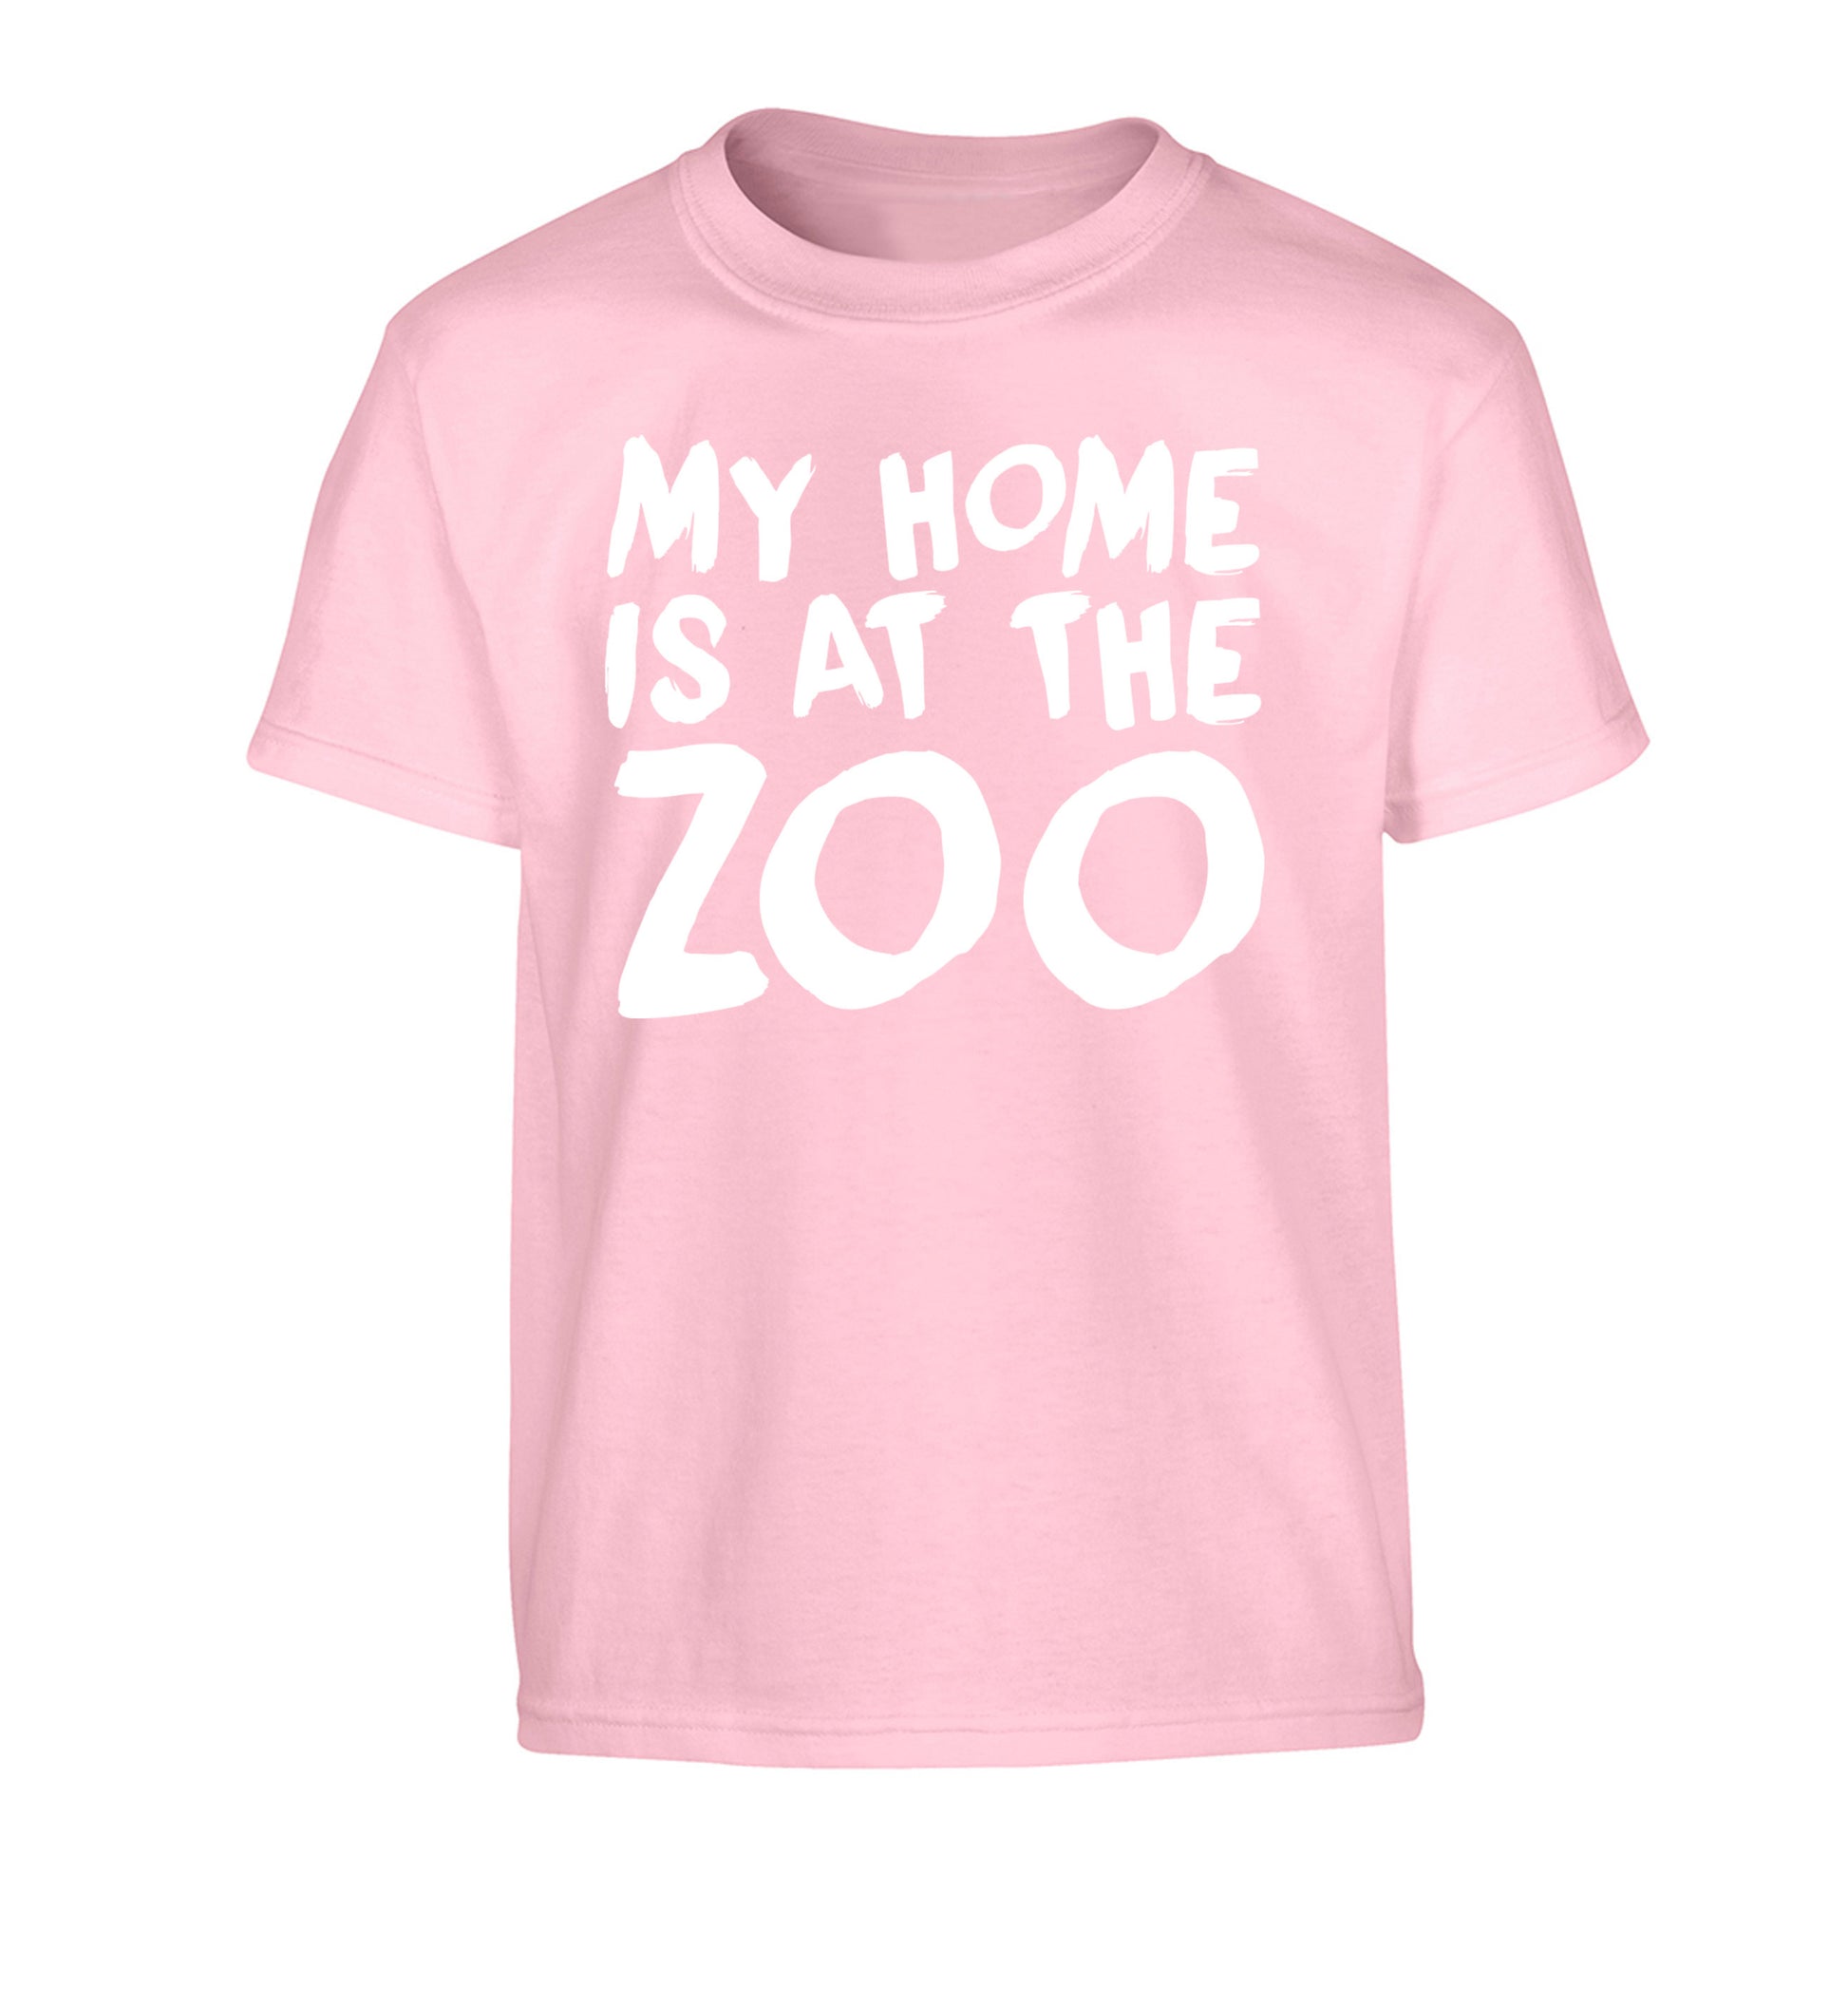 My home is at the zoo Children's light pink Tshirt 12-14 Years